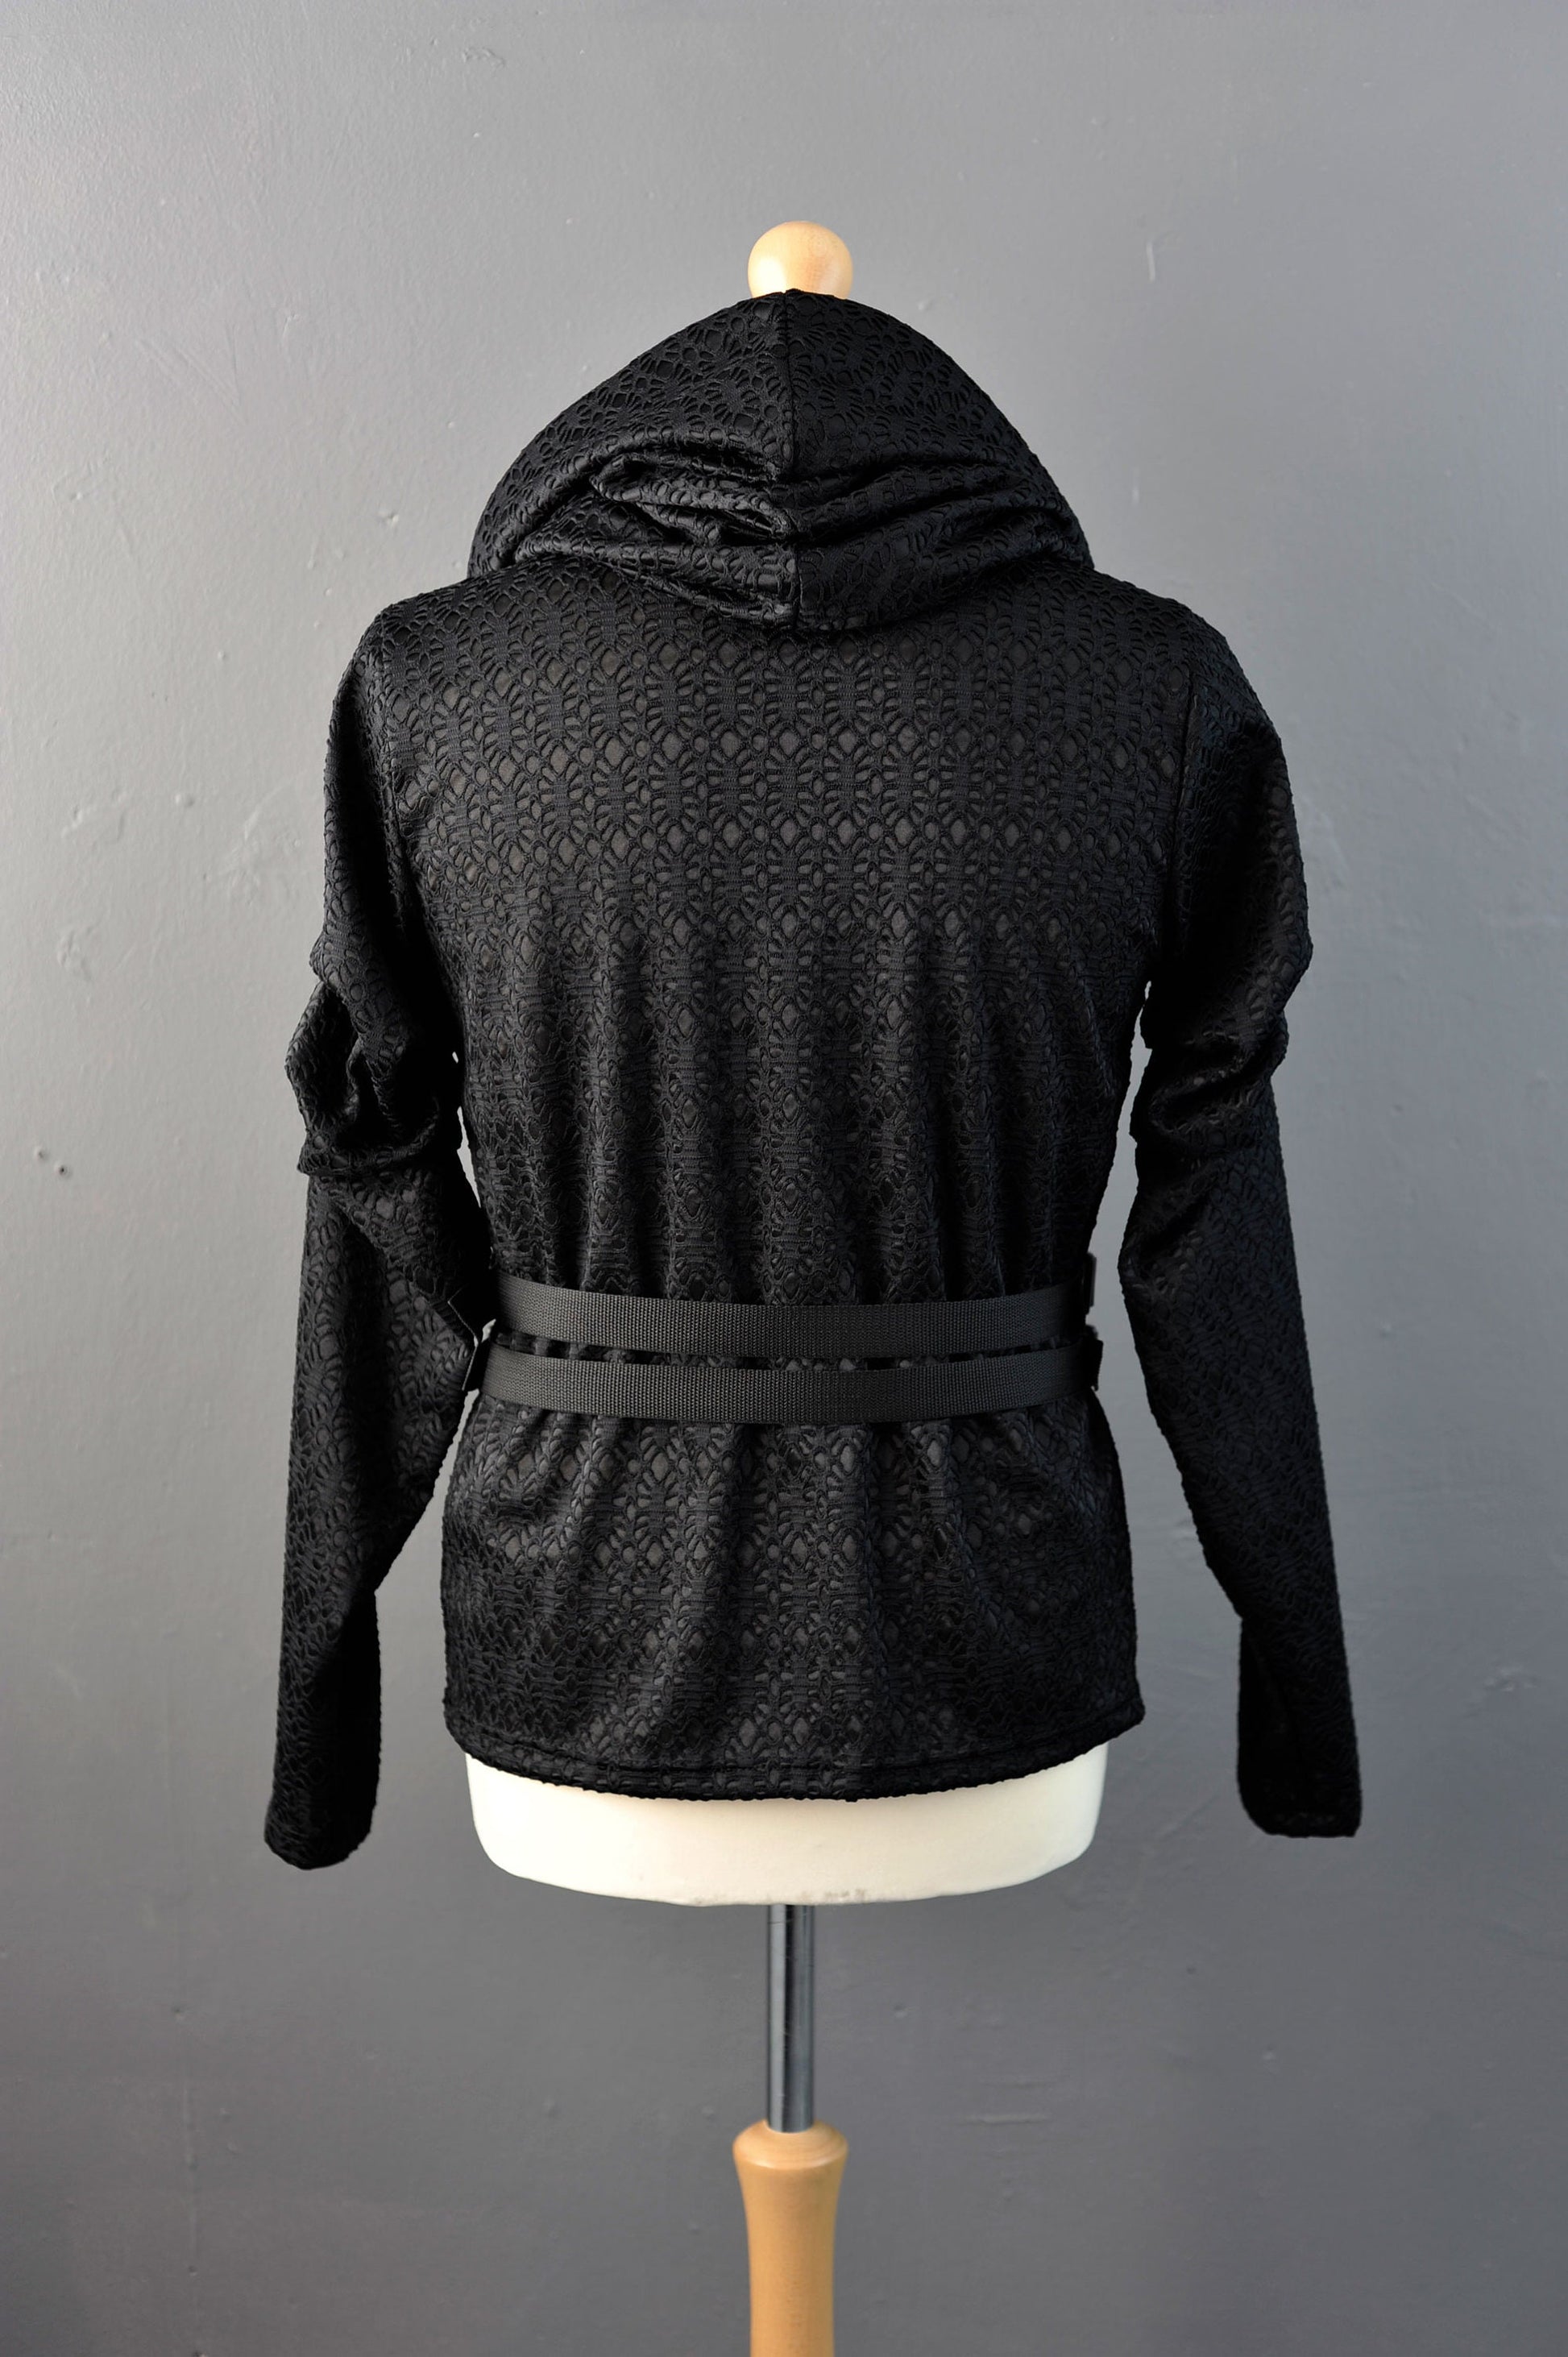 Cyberpunk Hooded Cowl Neck Top, Futuristic Hoodie with Buckles Straps S to XL